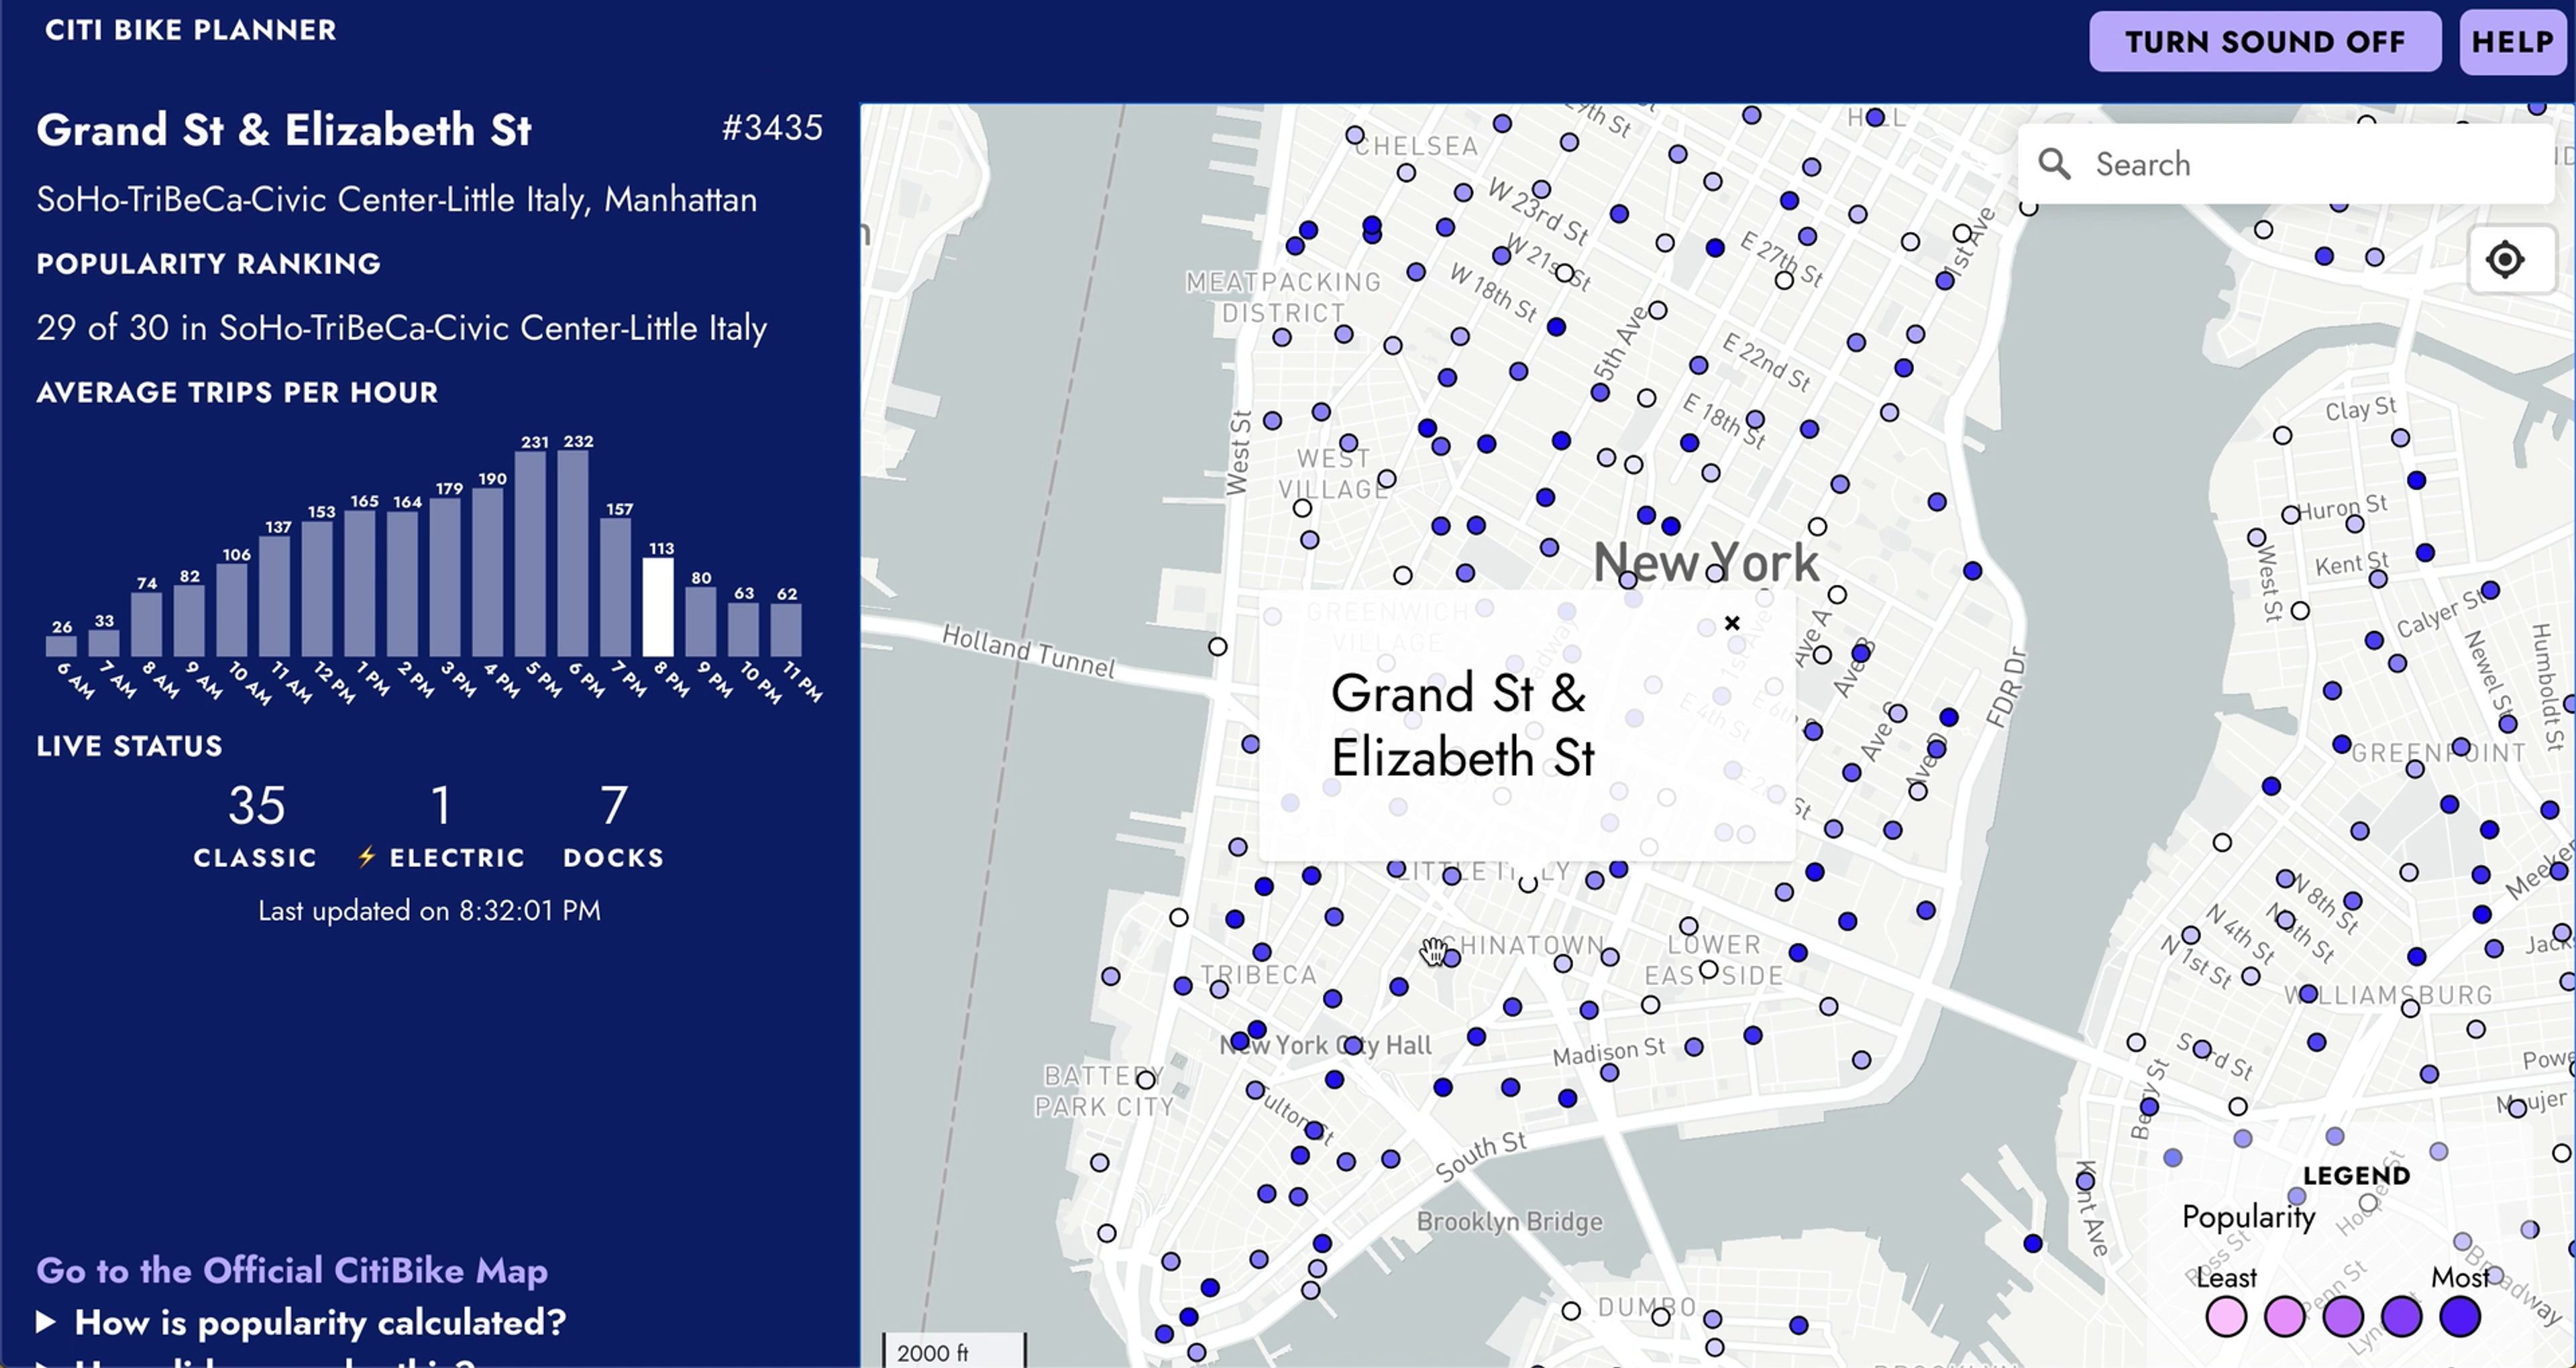 Screenshot of Citi Bike Planner app with bar charts and map.